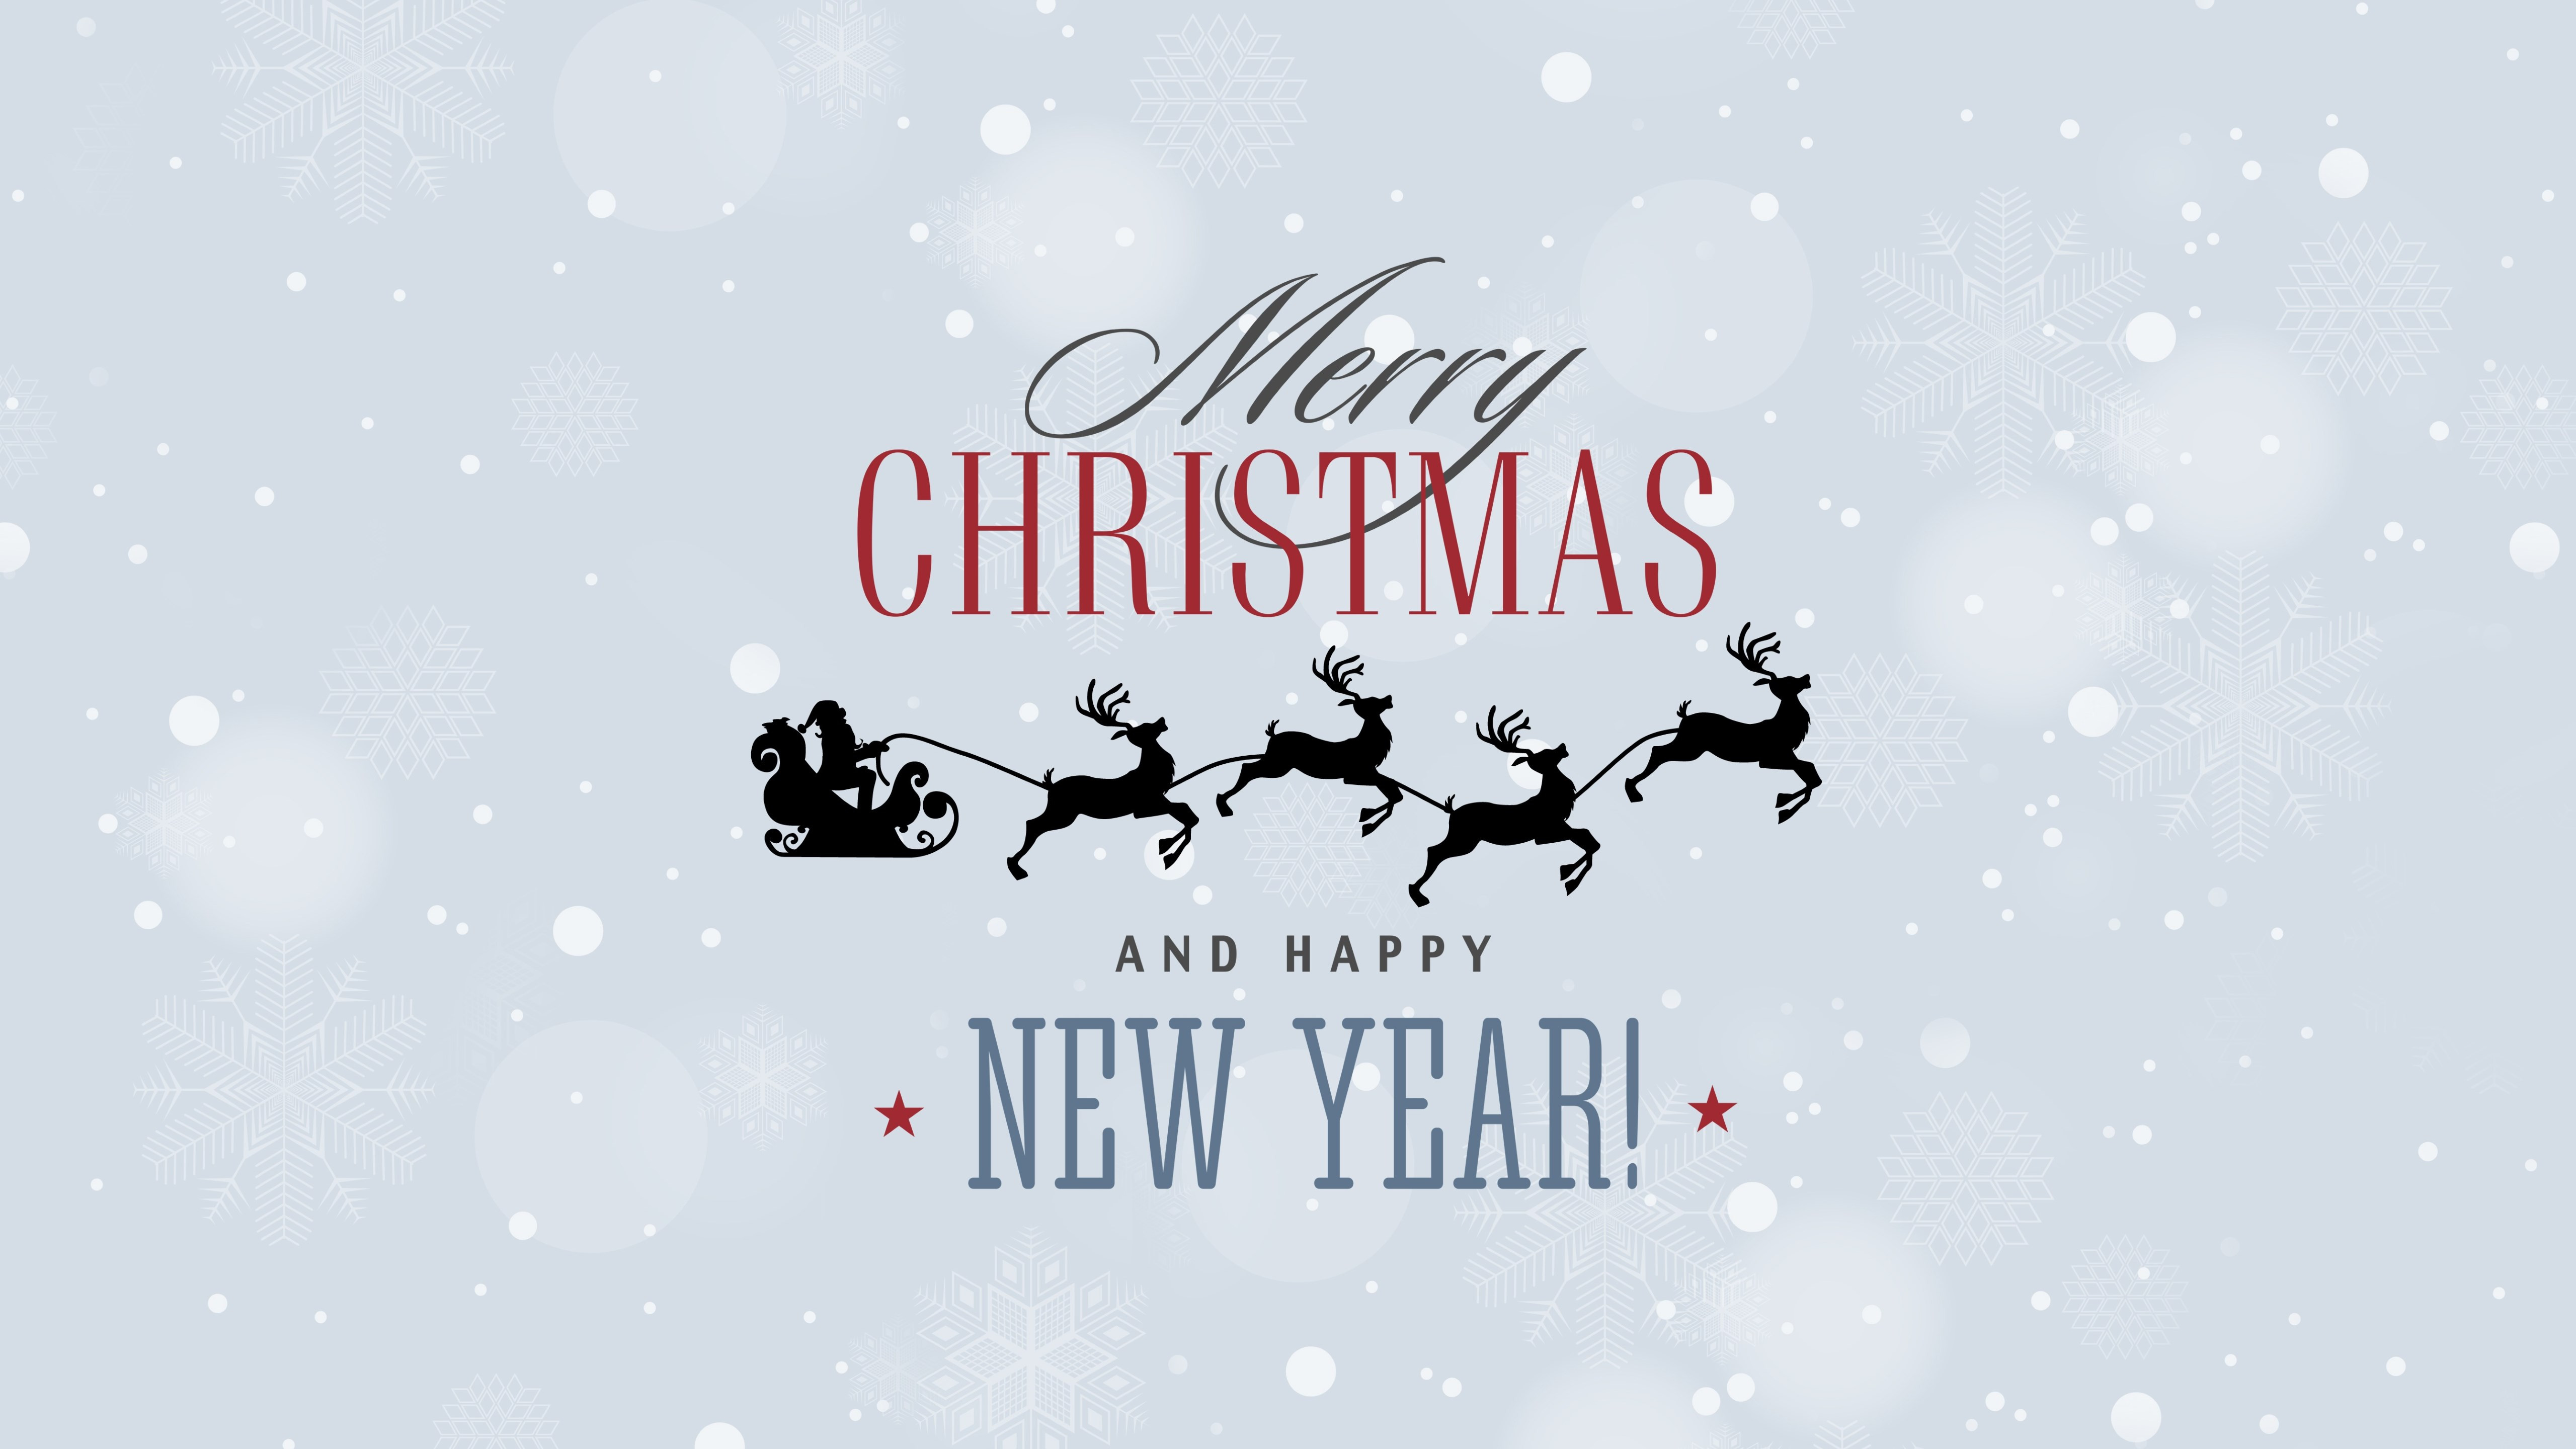 Merry Christmas and a Happy New Year wallpaper 5120x2880